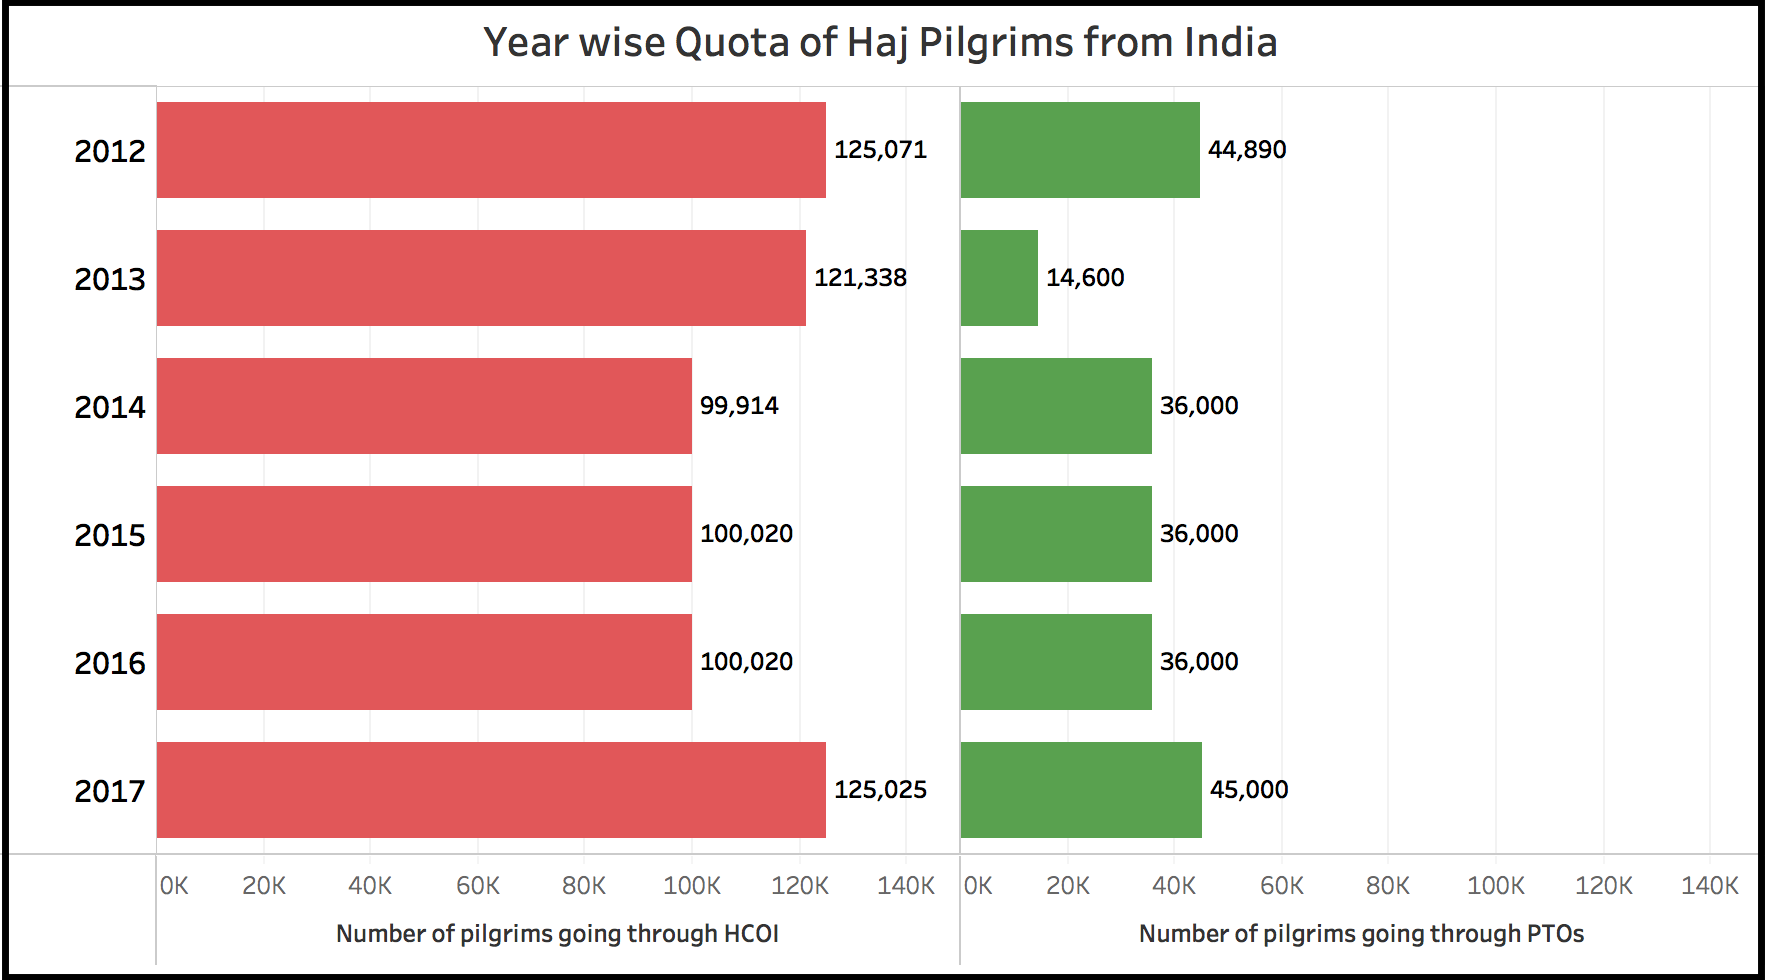 How much Subsidy does the Government extend to Haj Pilgrims?